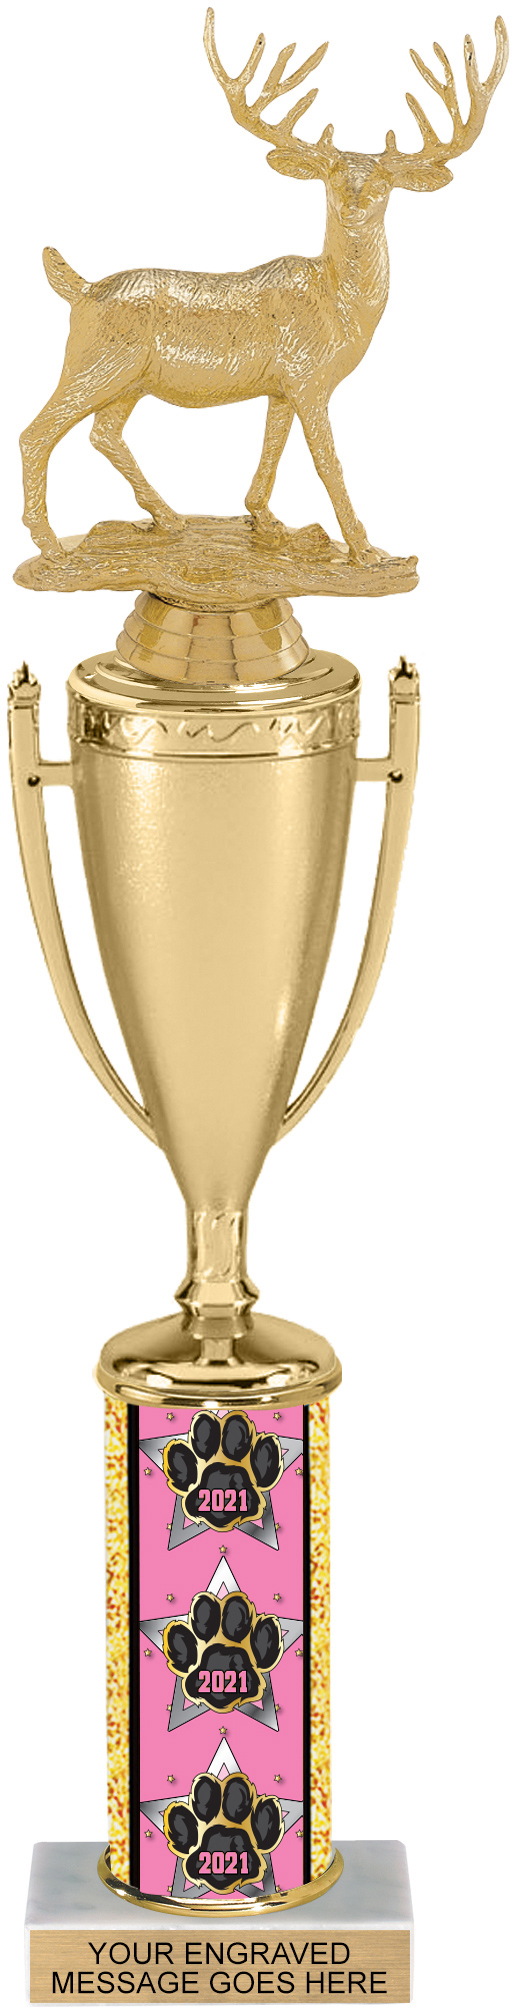 Year Exclusive Paw Column Cup Trophy - 15 inch